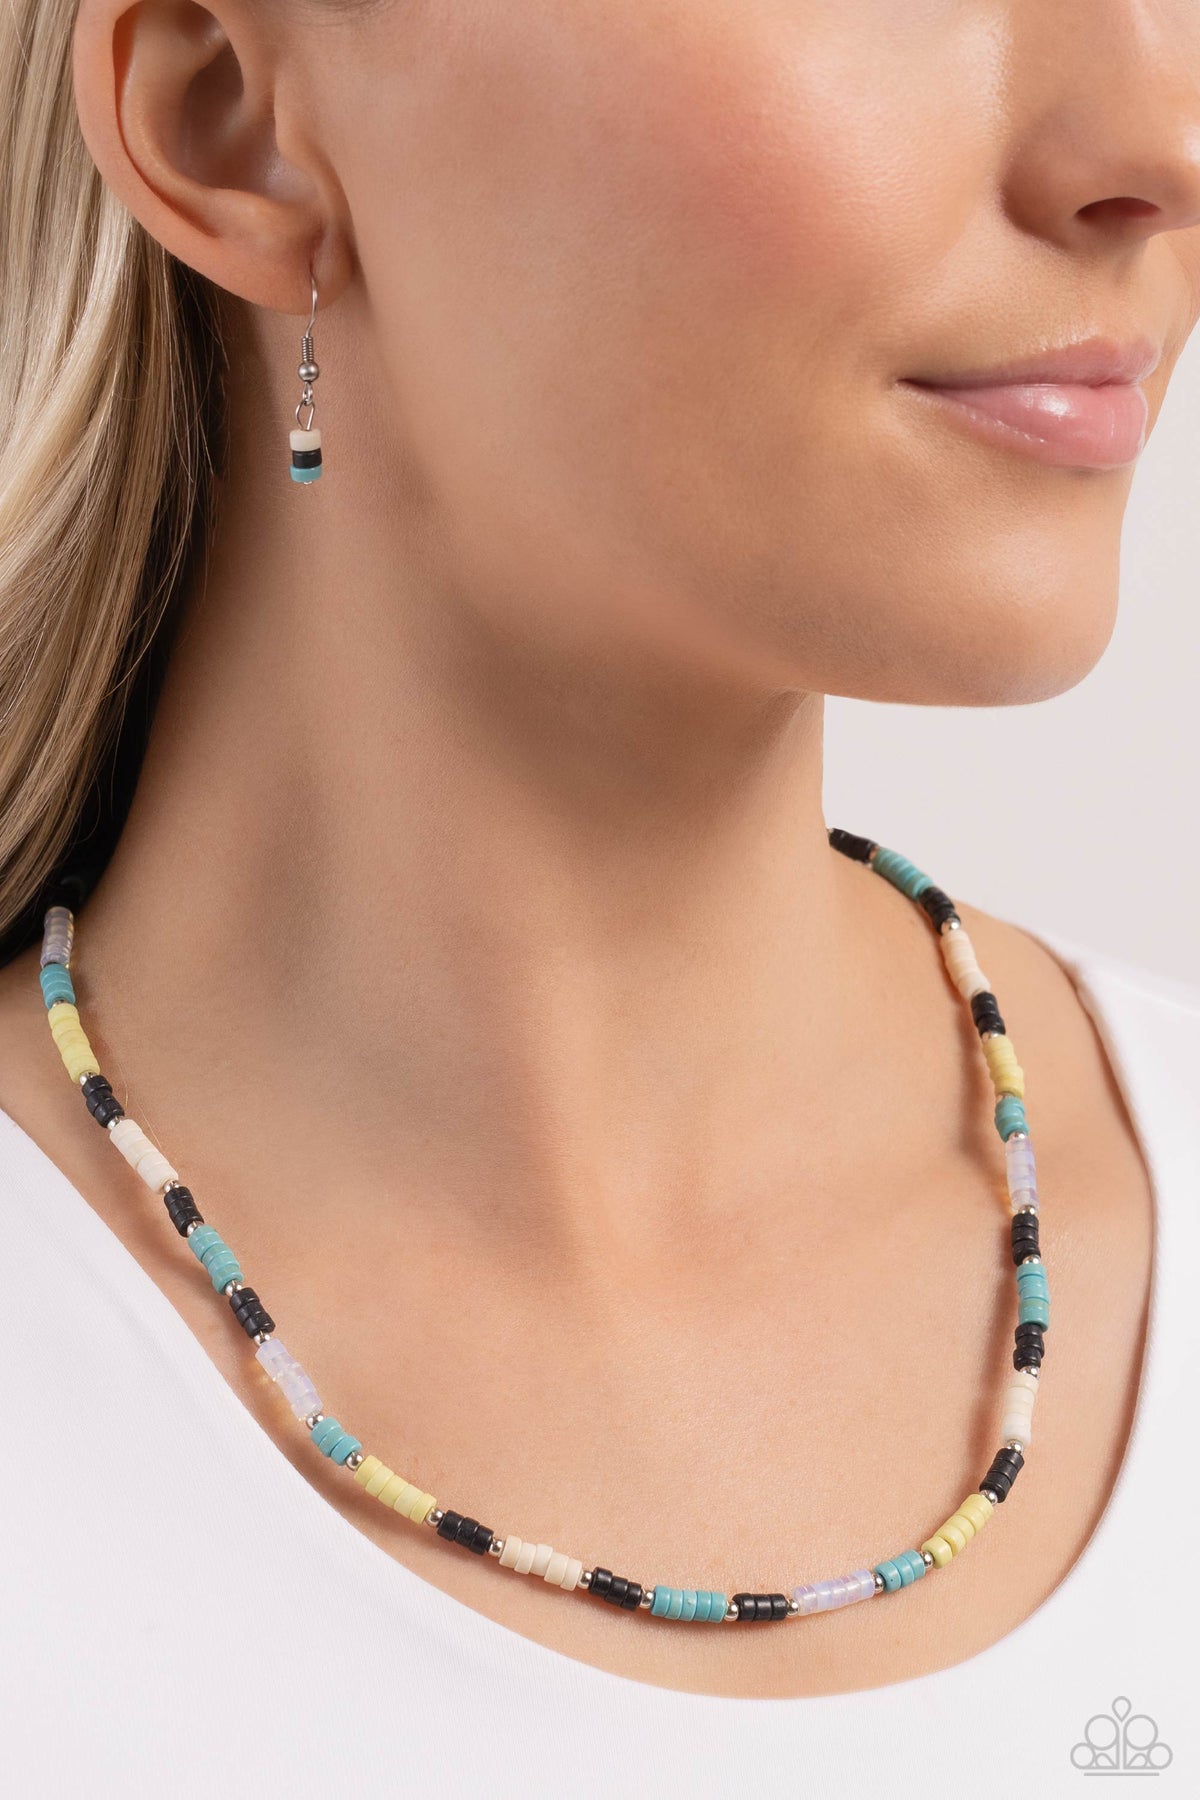 Oasis Outline Black, Yellow &amp; Blue Stone Necklace - Paparazzi Accessories-on model - CarasShop.com - $5 Jewelry by Cara Jewels